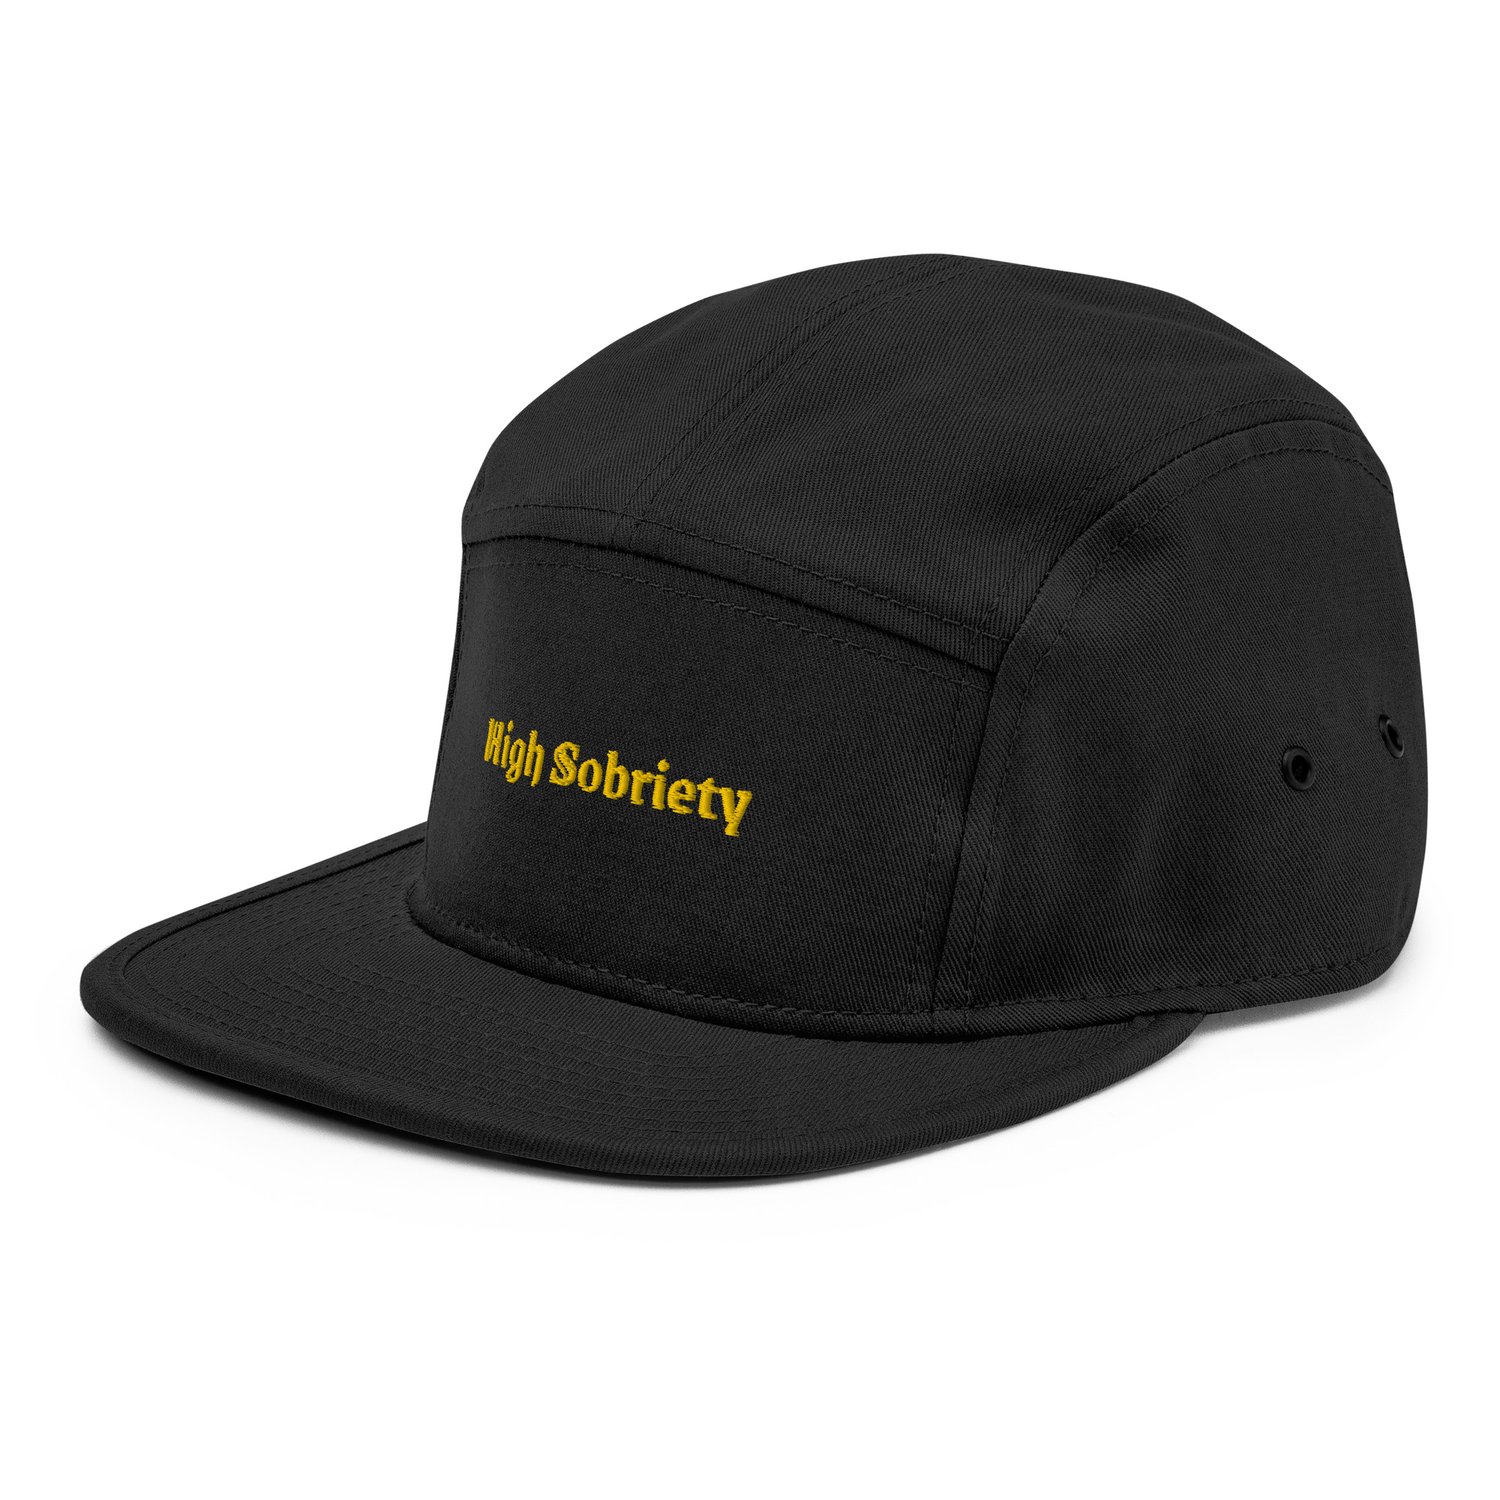 Image of "High Sobriety" 5 Panel Camper